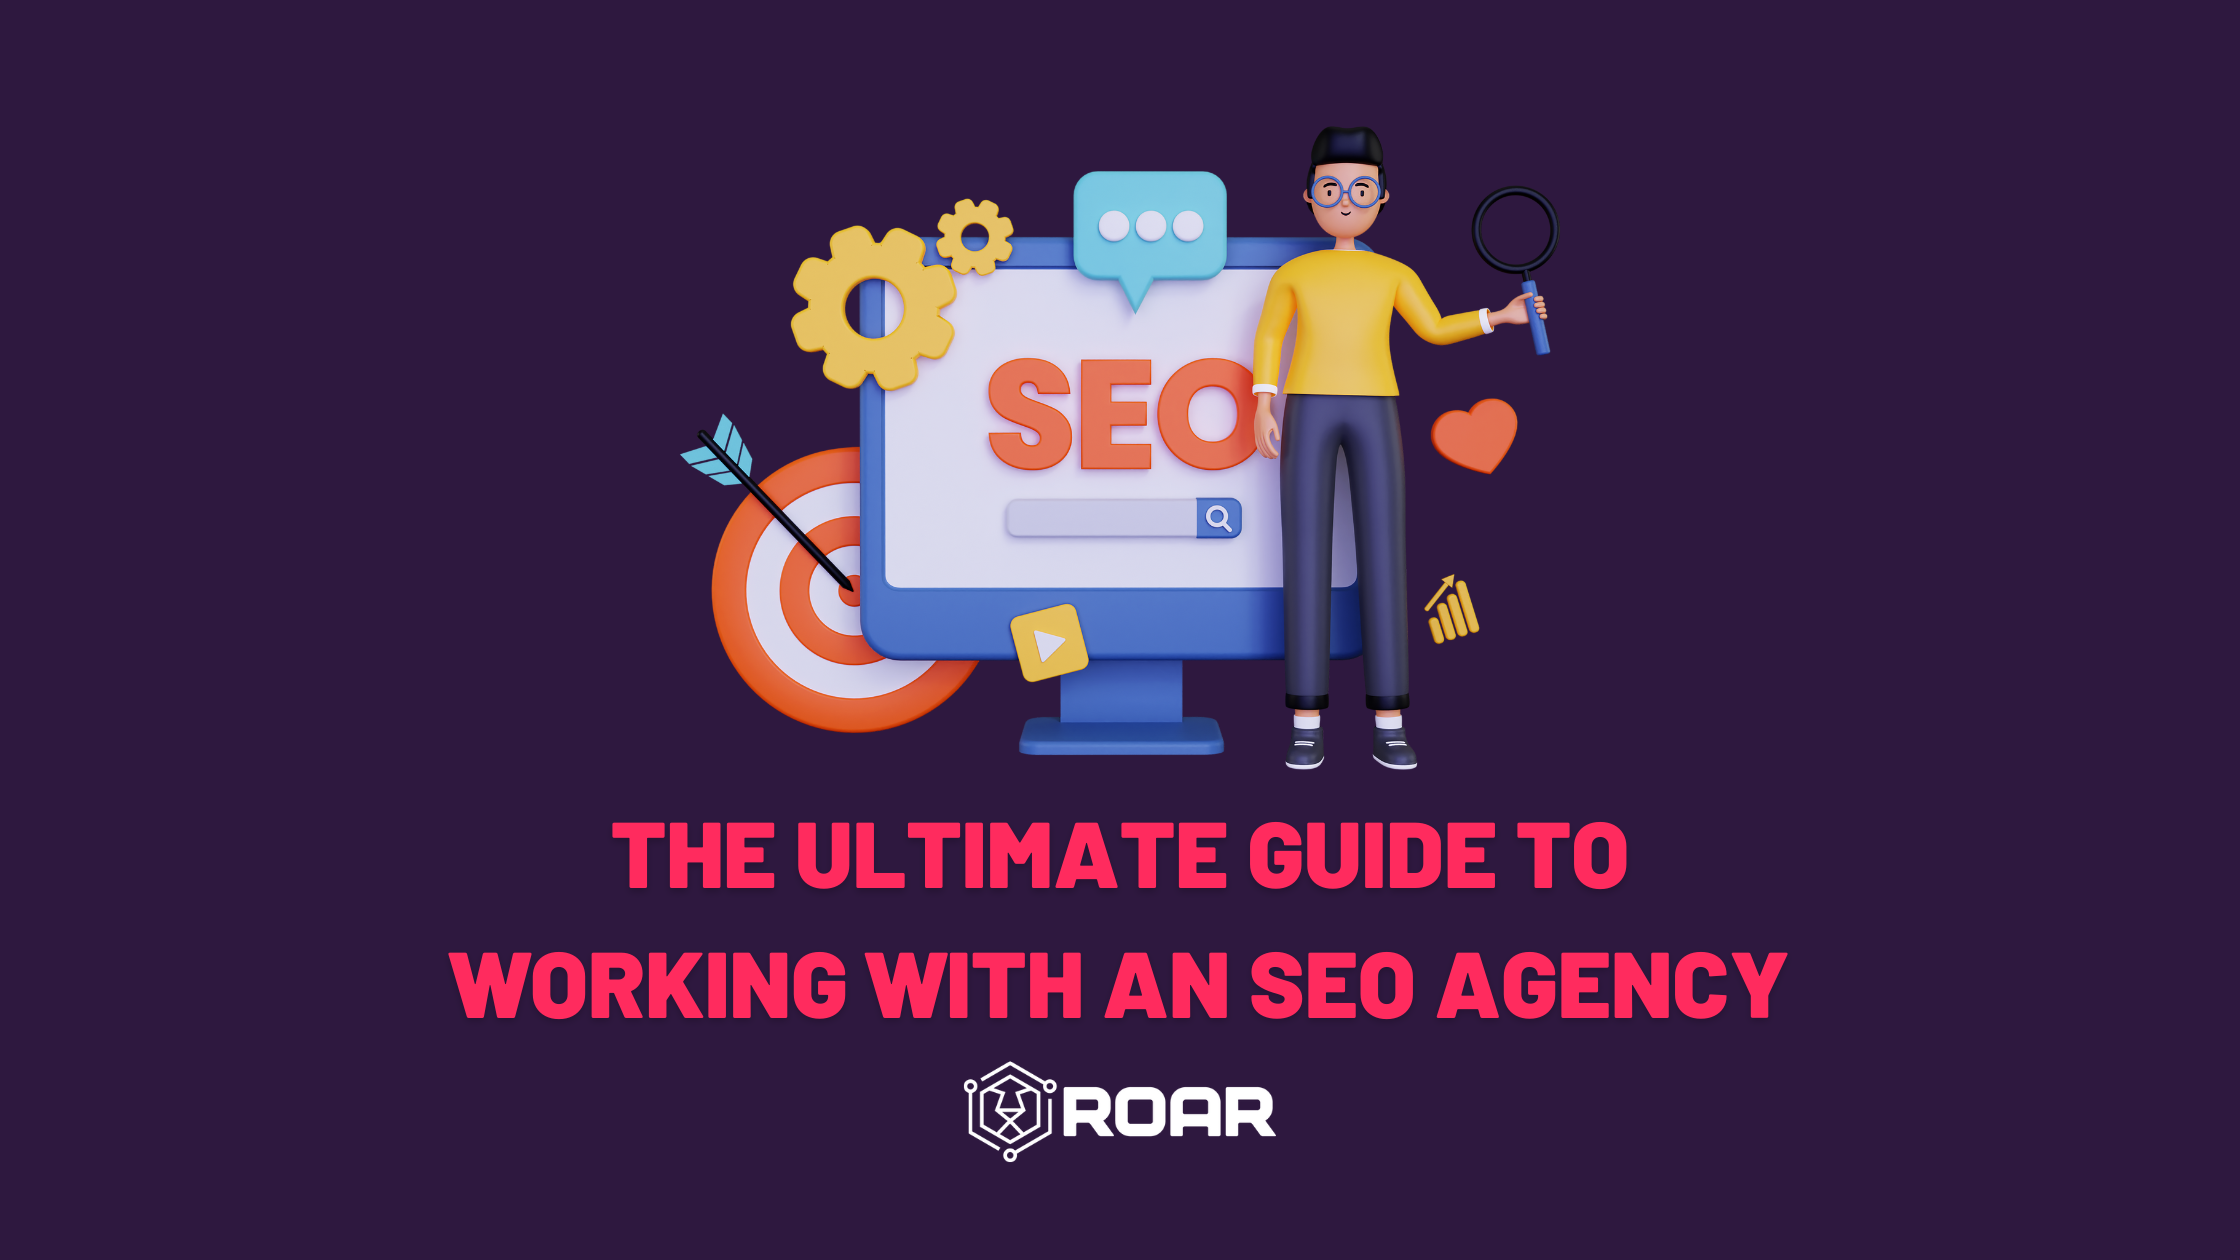 THE ULTIMATE GUIDE TO WORKING WITH AN SEO AGENCY